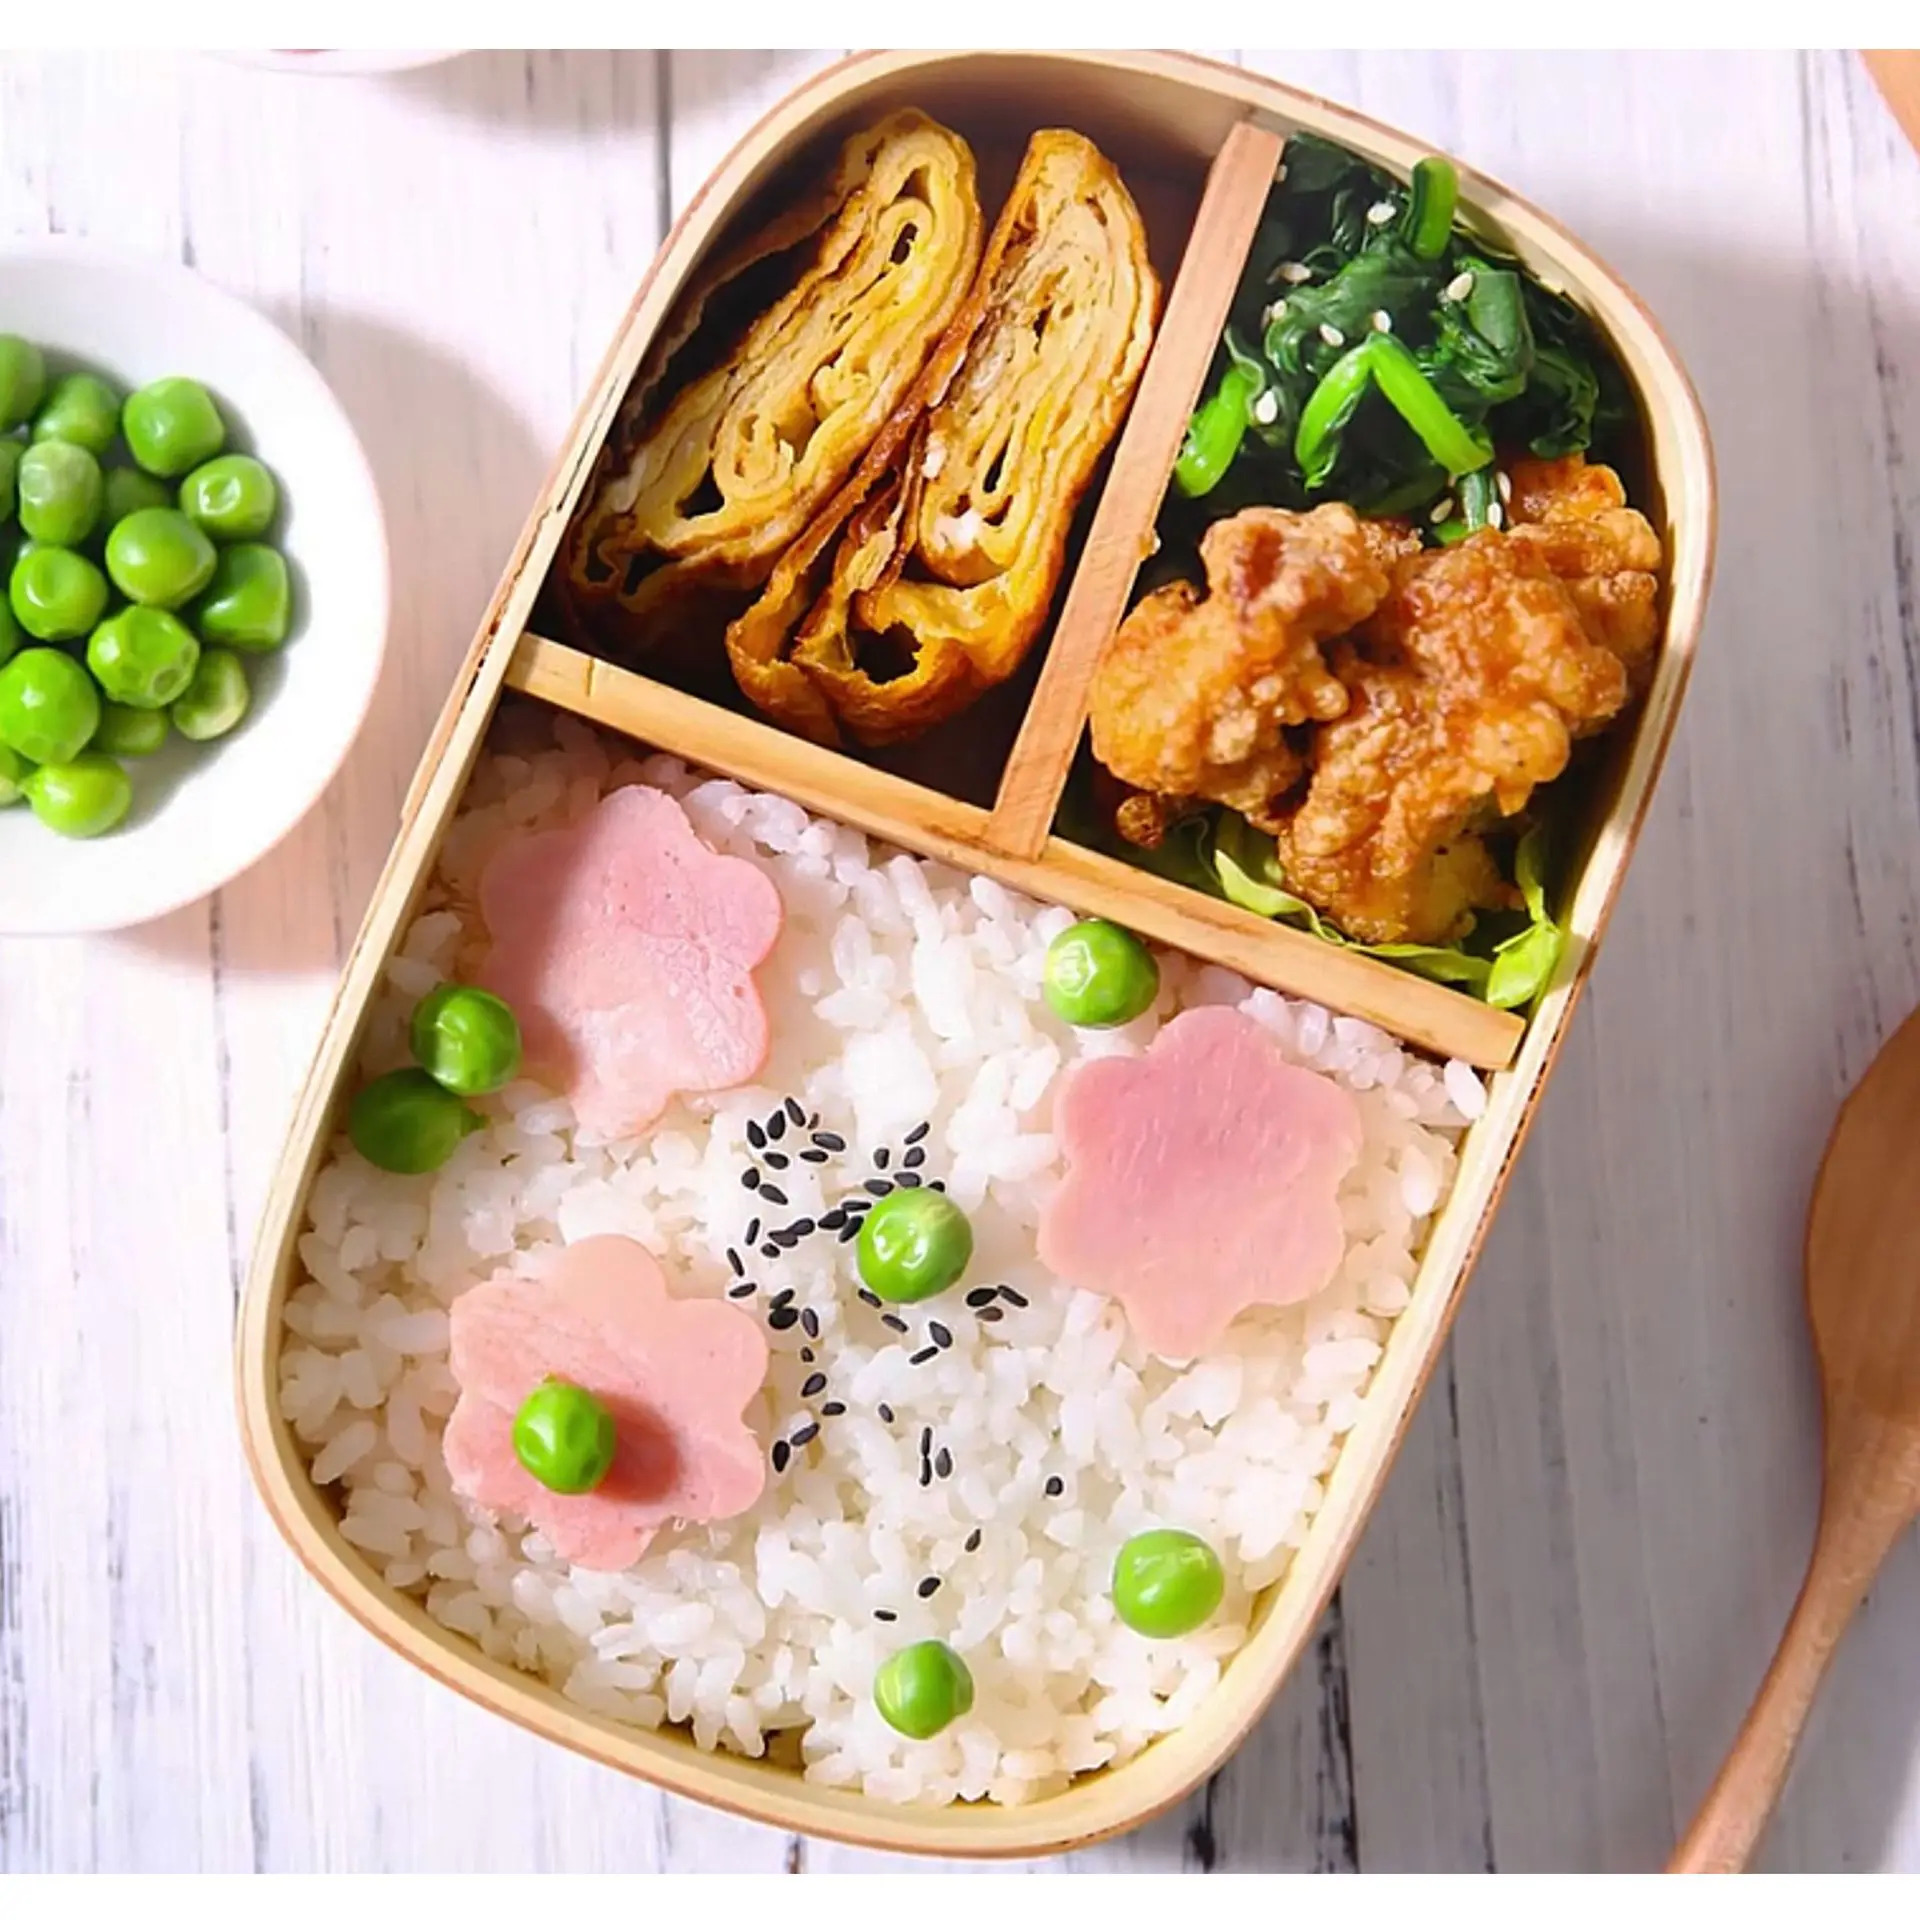 https://ae01.alicdn.com/kf/S5bd5f38986b14098811187945ca4d8f9K/Wooden-Double-Layer-Lunch-Box-Japanese-Bento-Box-Divided-Lunchbox-Food-Storage-Containers-Lunch-Box-for.jpg